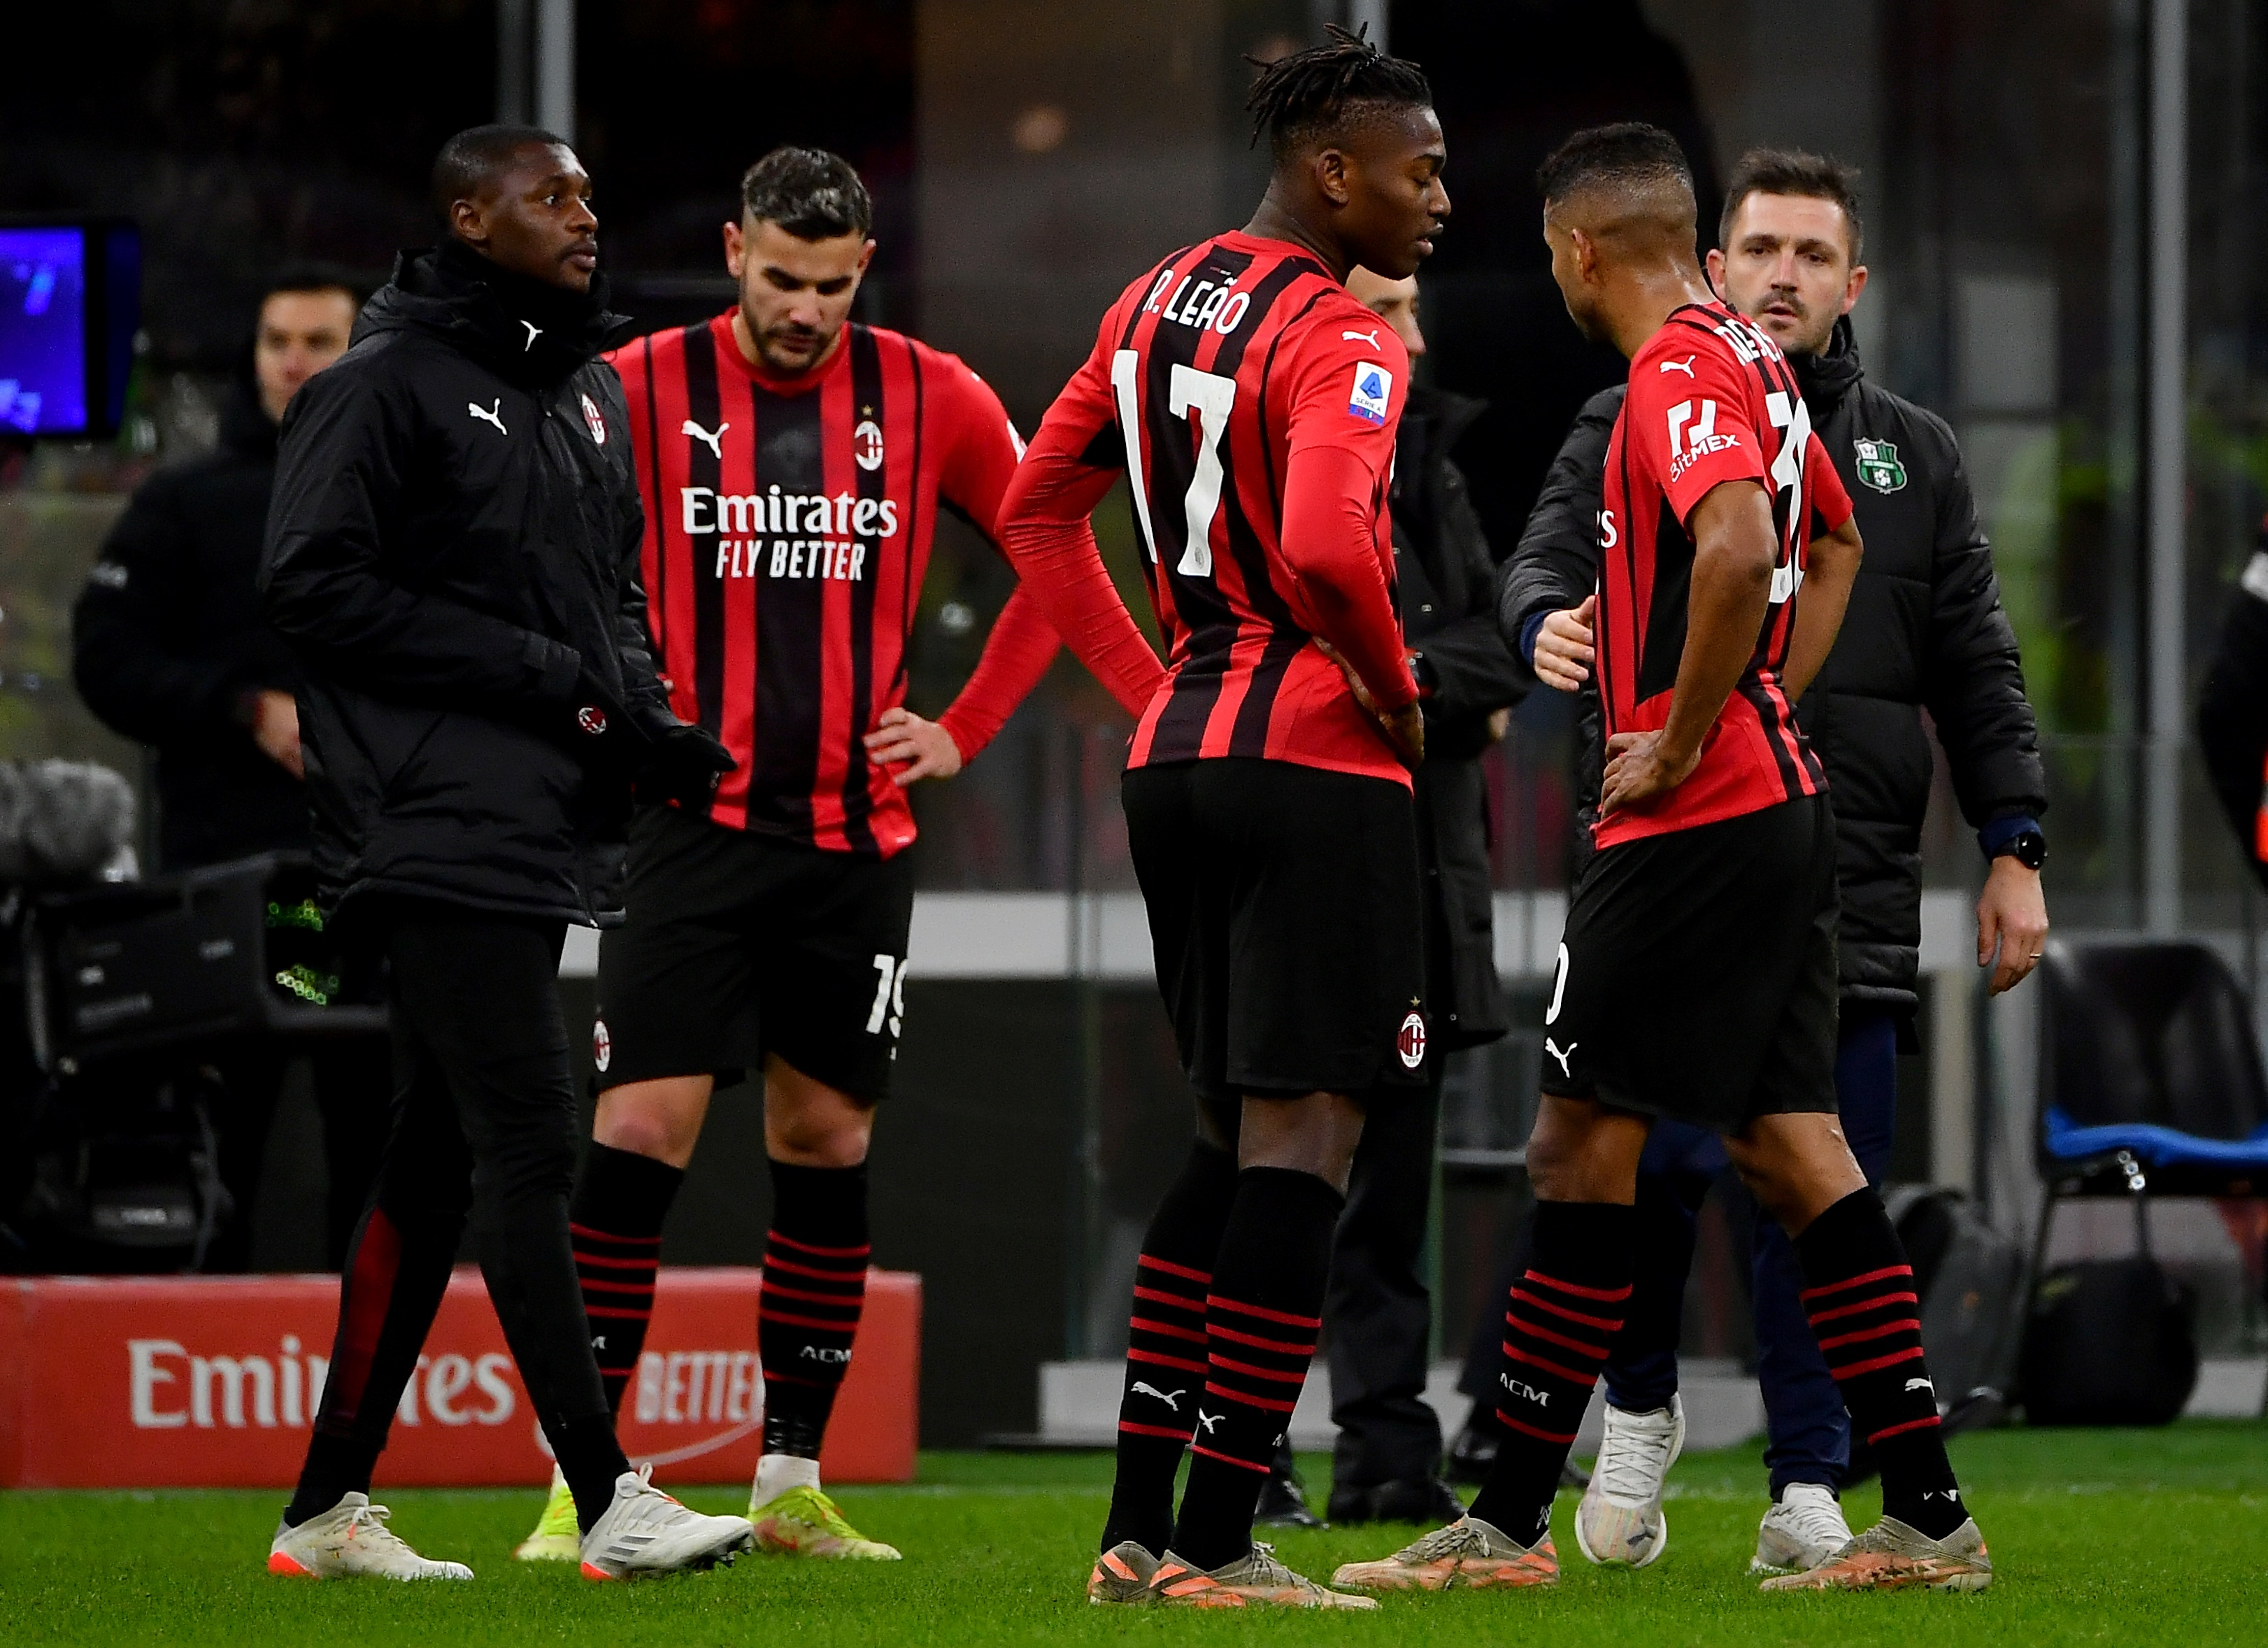 MILAN: AC Milan players react at the end of their match against Sassuolo at the San Siro stadium in Milan yesterday. - AFPn